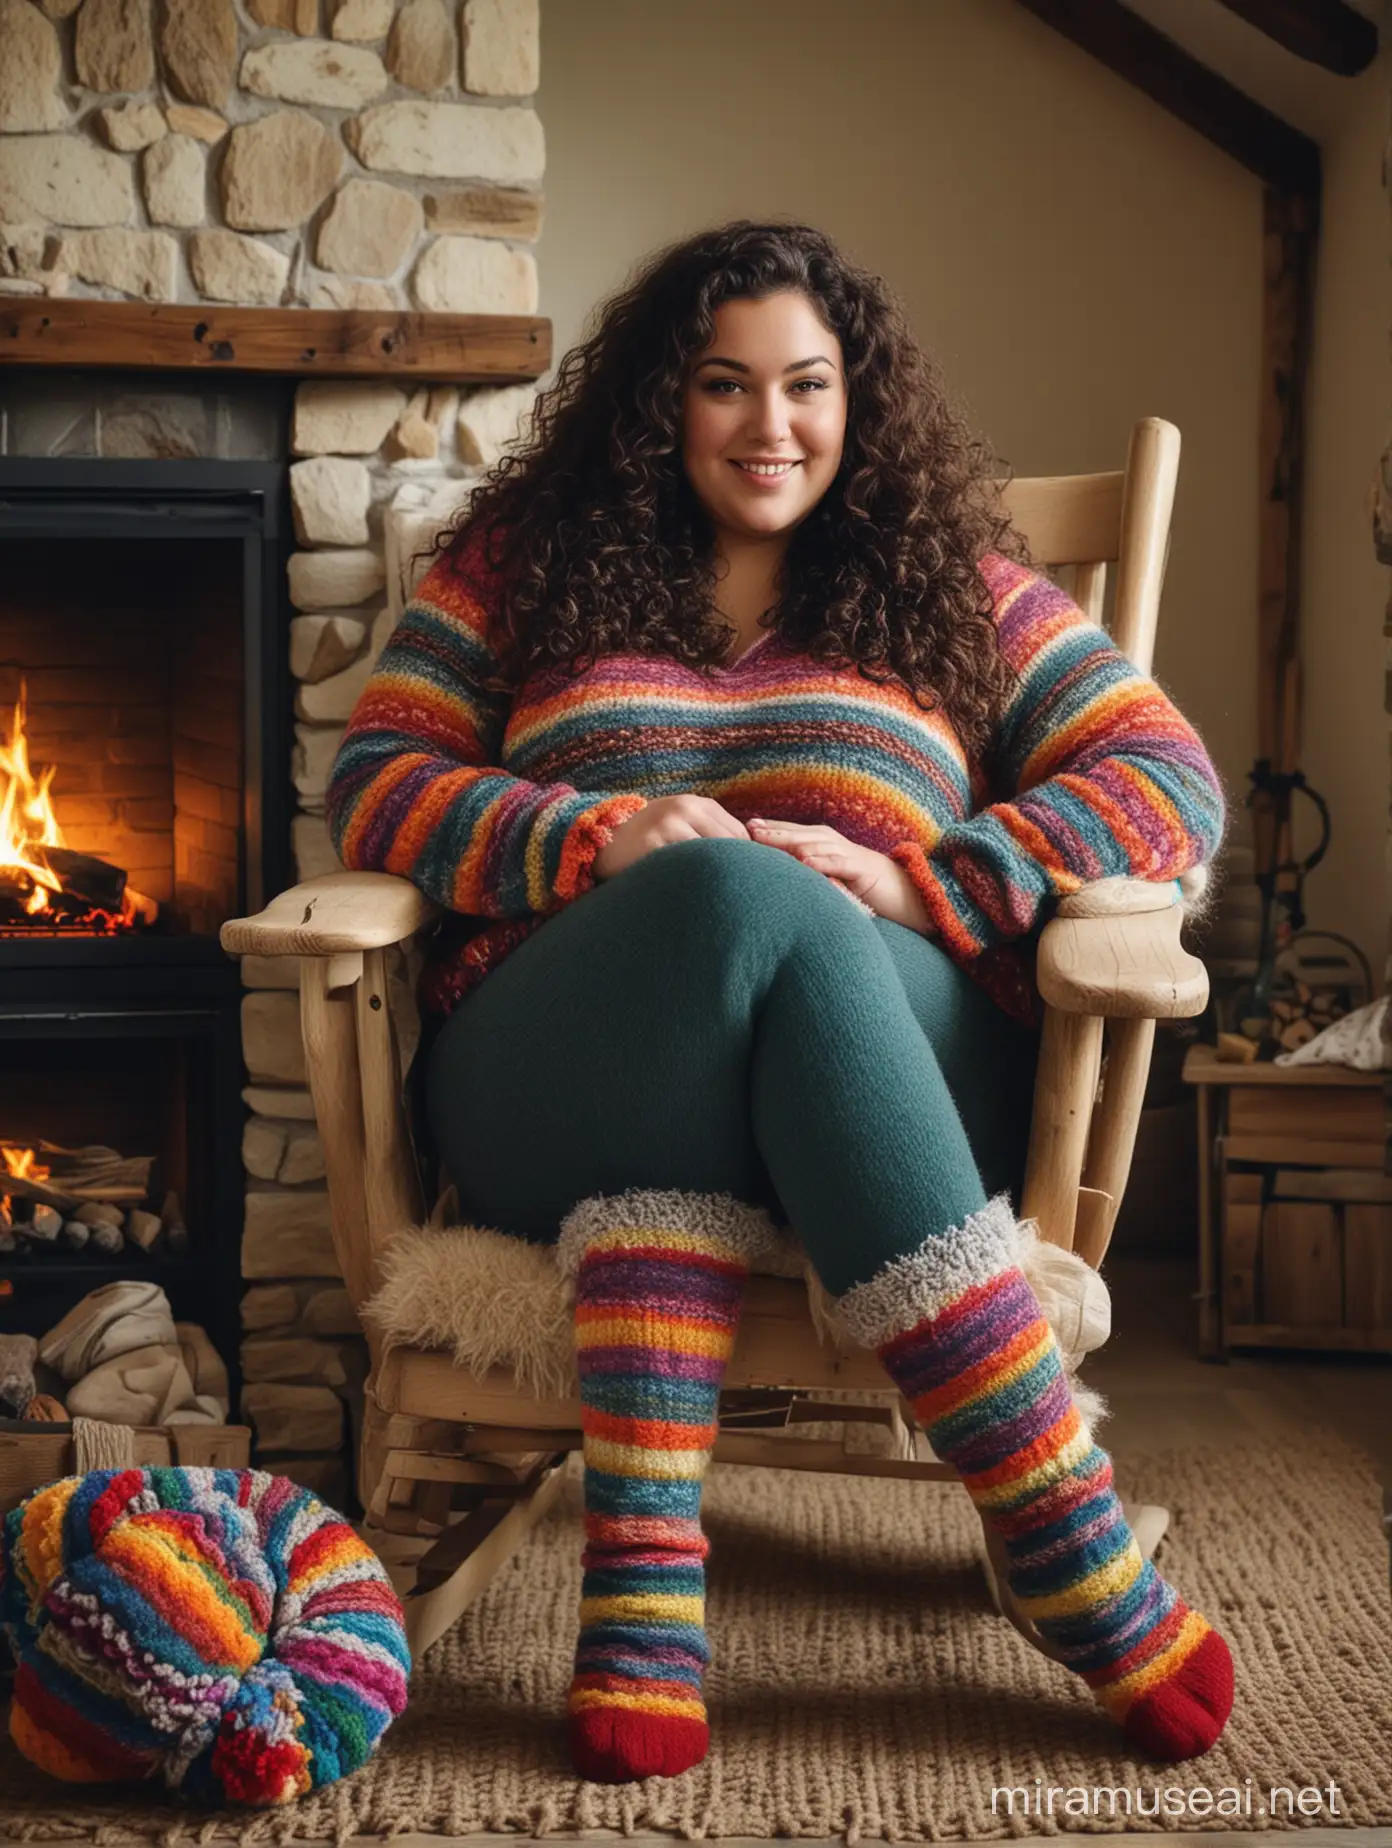 plus-size woman with long dark curly hair and outsize huge fat XXL boobs, wearing knitted stockings and a collection of colourful thick fuzzy wool sweaters, sitting in a rocking chair by a farmhouse style fire place